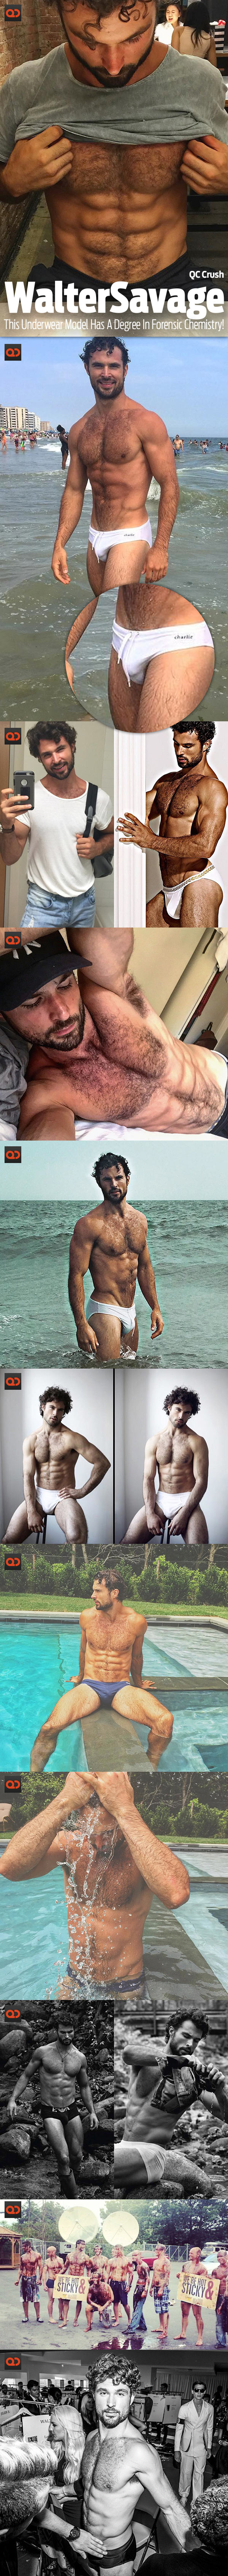 QC Crush: Walter Savage - Not Just A Pretty Face And A Gorgeous Set Of Abs - This Underwear Model Has A Degree In Forensic Chemistry!